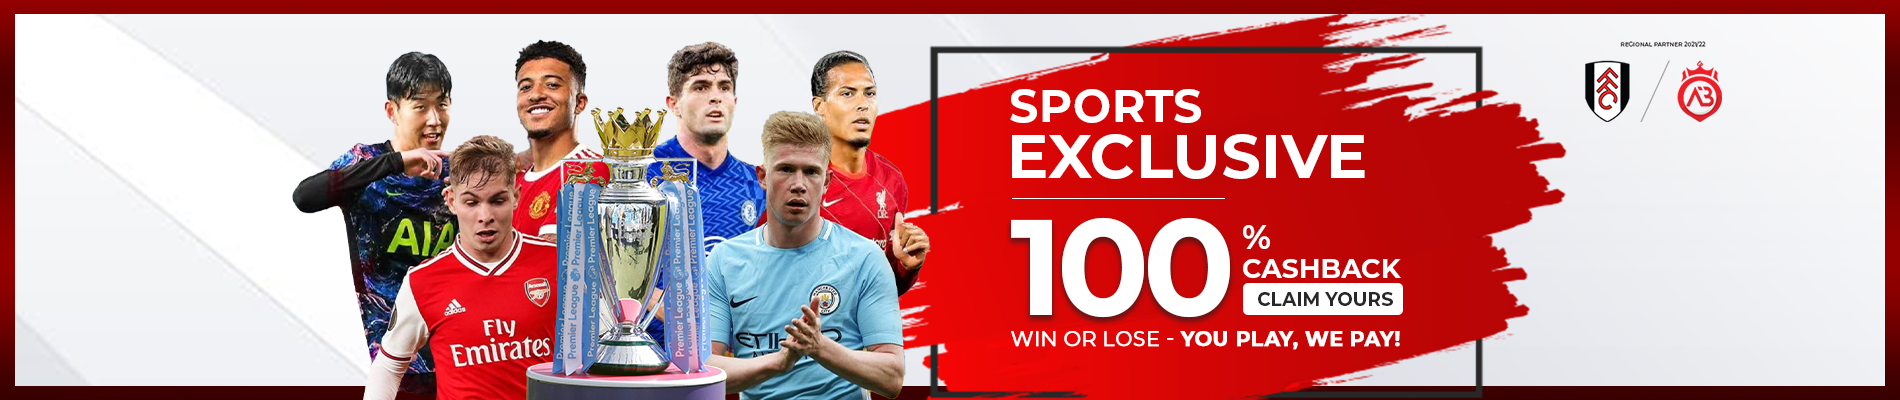 Sports Exclusive Promotions